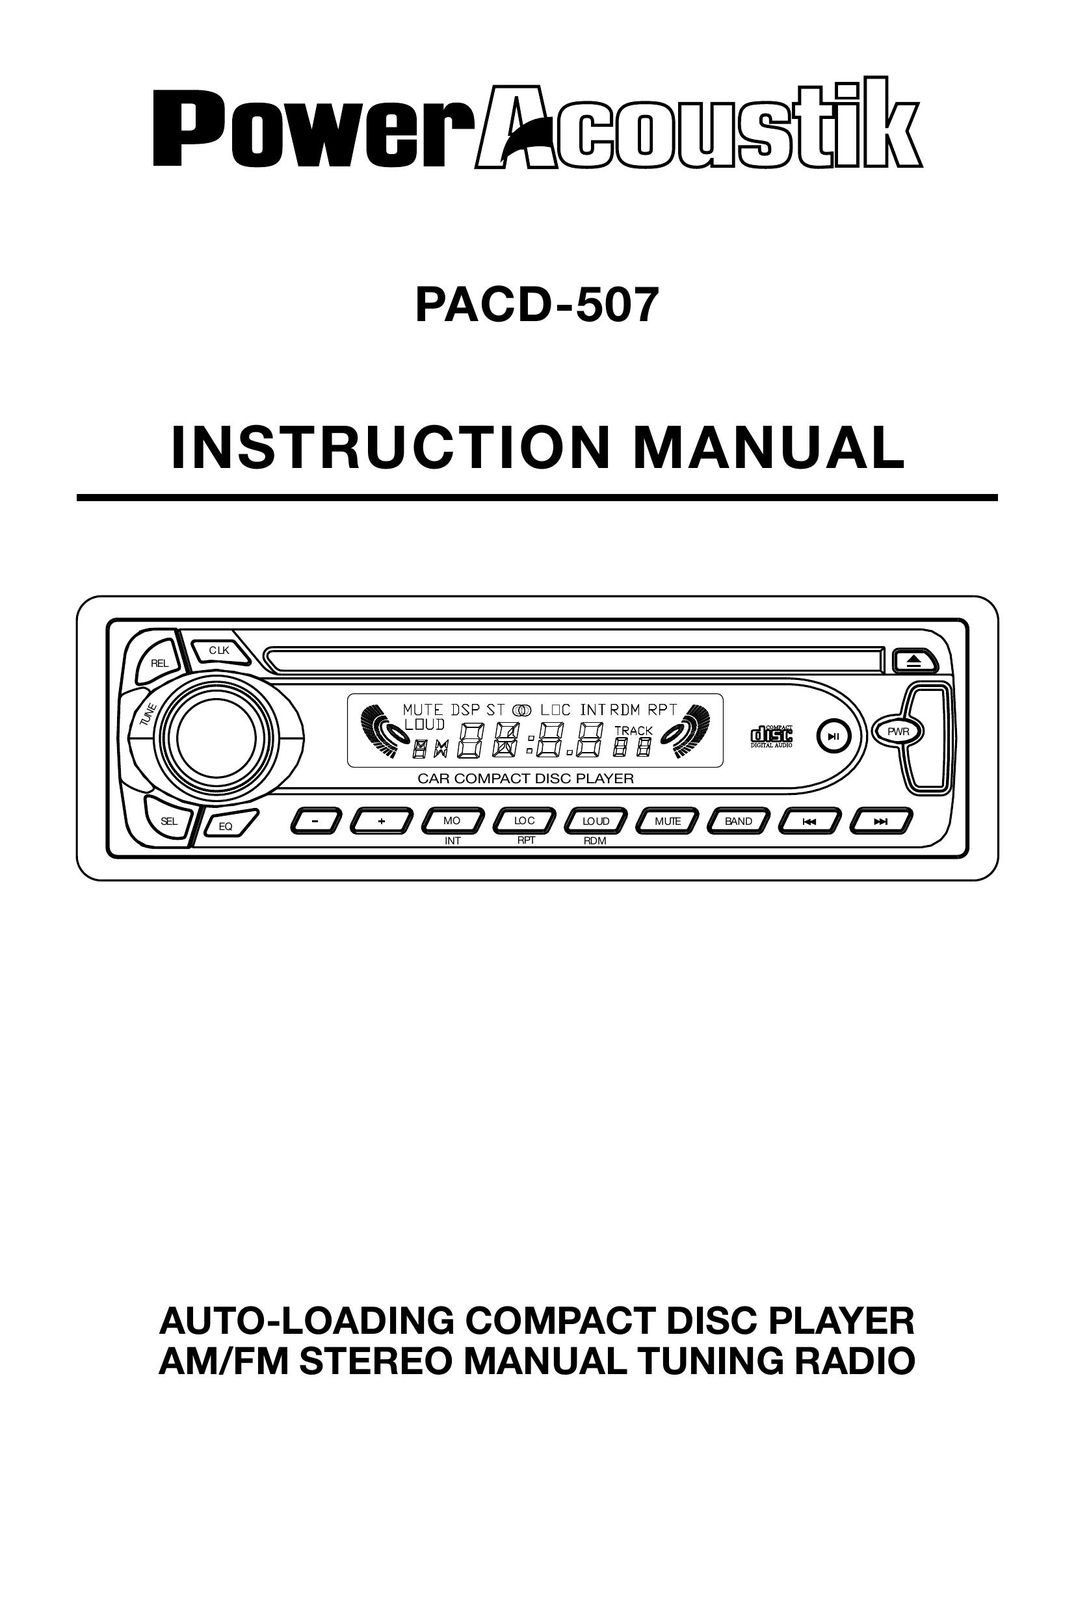 Power Acoustik PACD-507 Car Stereo System User Manual